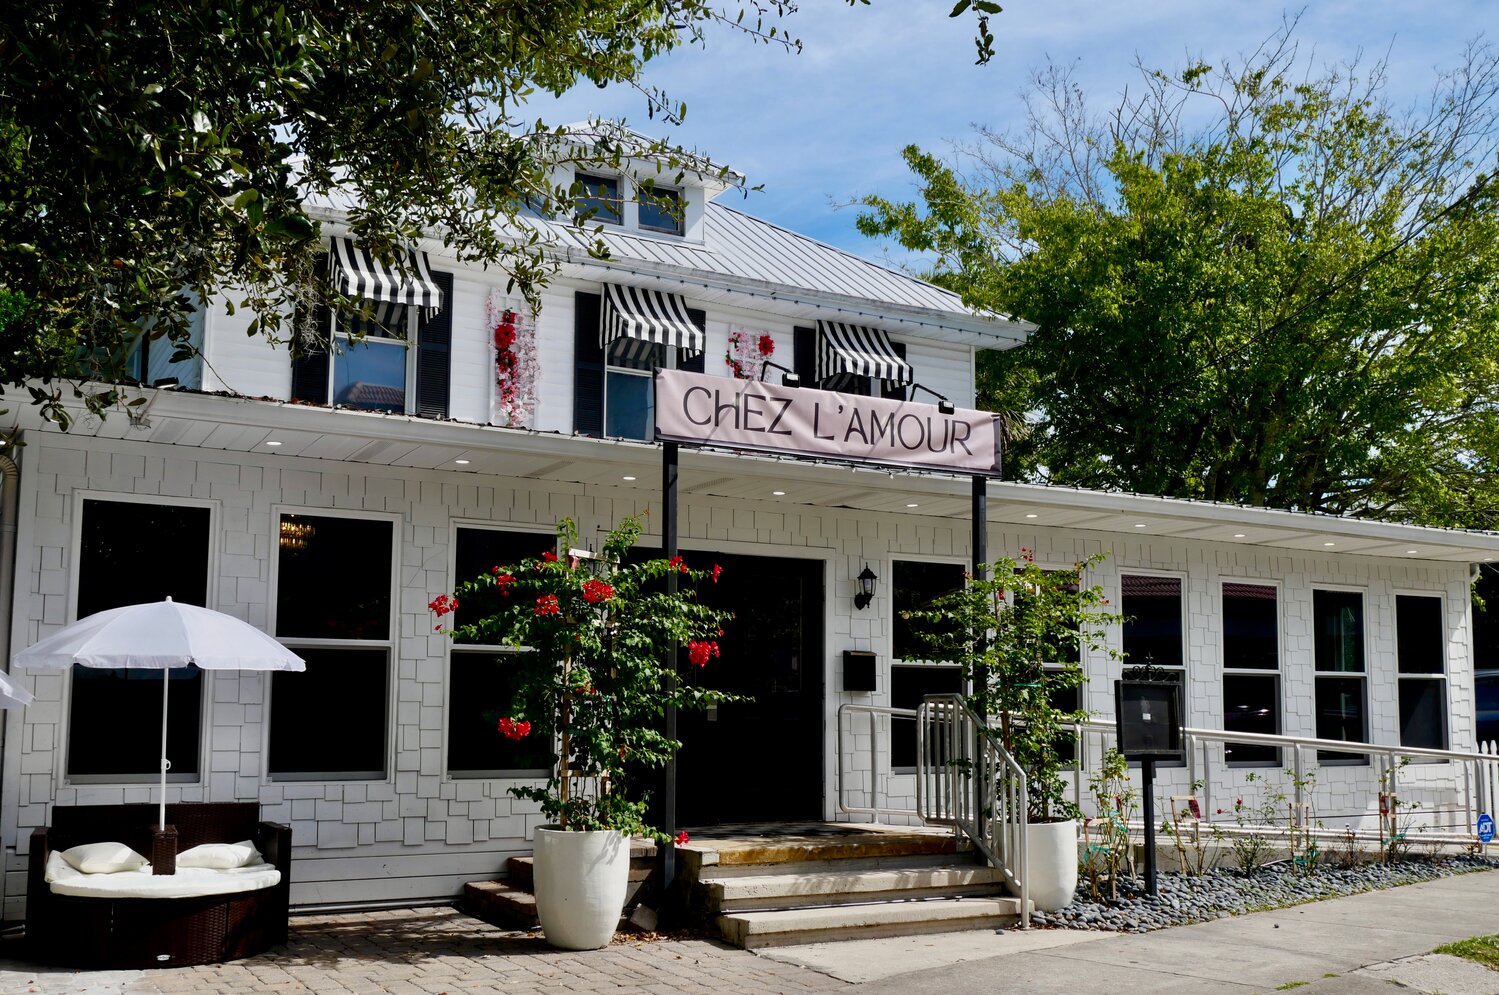 Chez L'Amour is located at 45 San Marco Ave. in uptown St. Augustine.